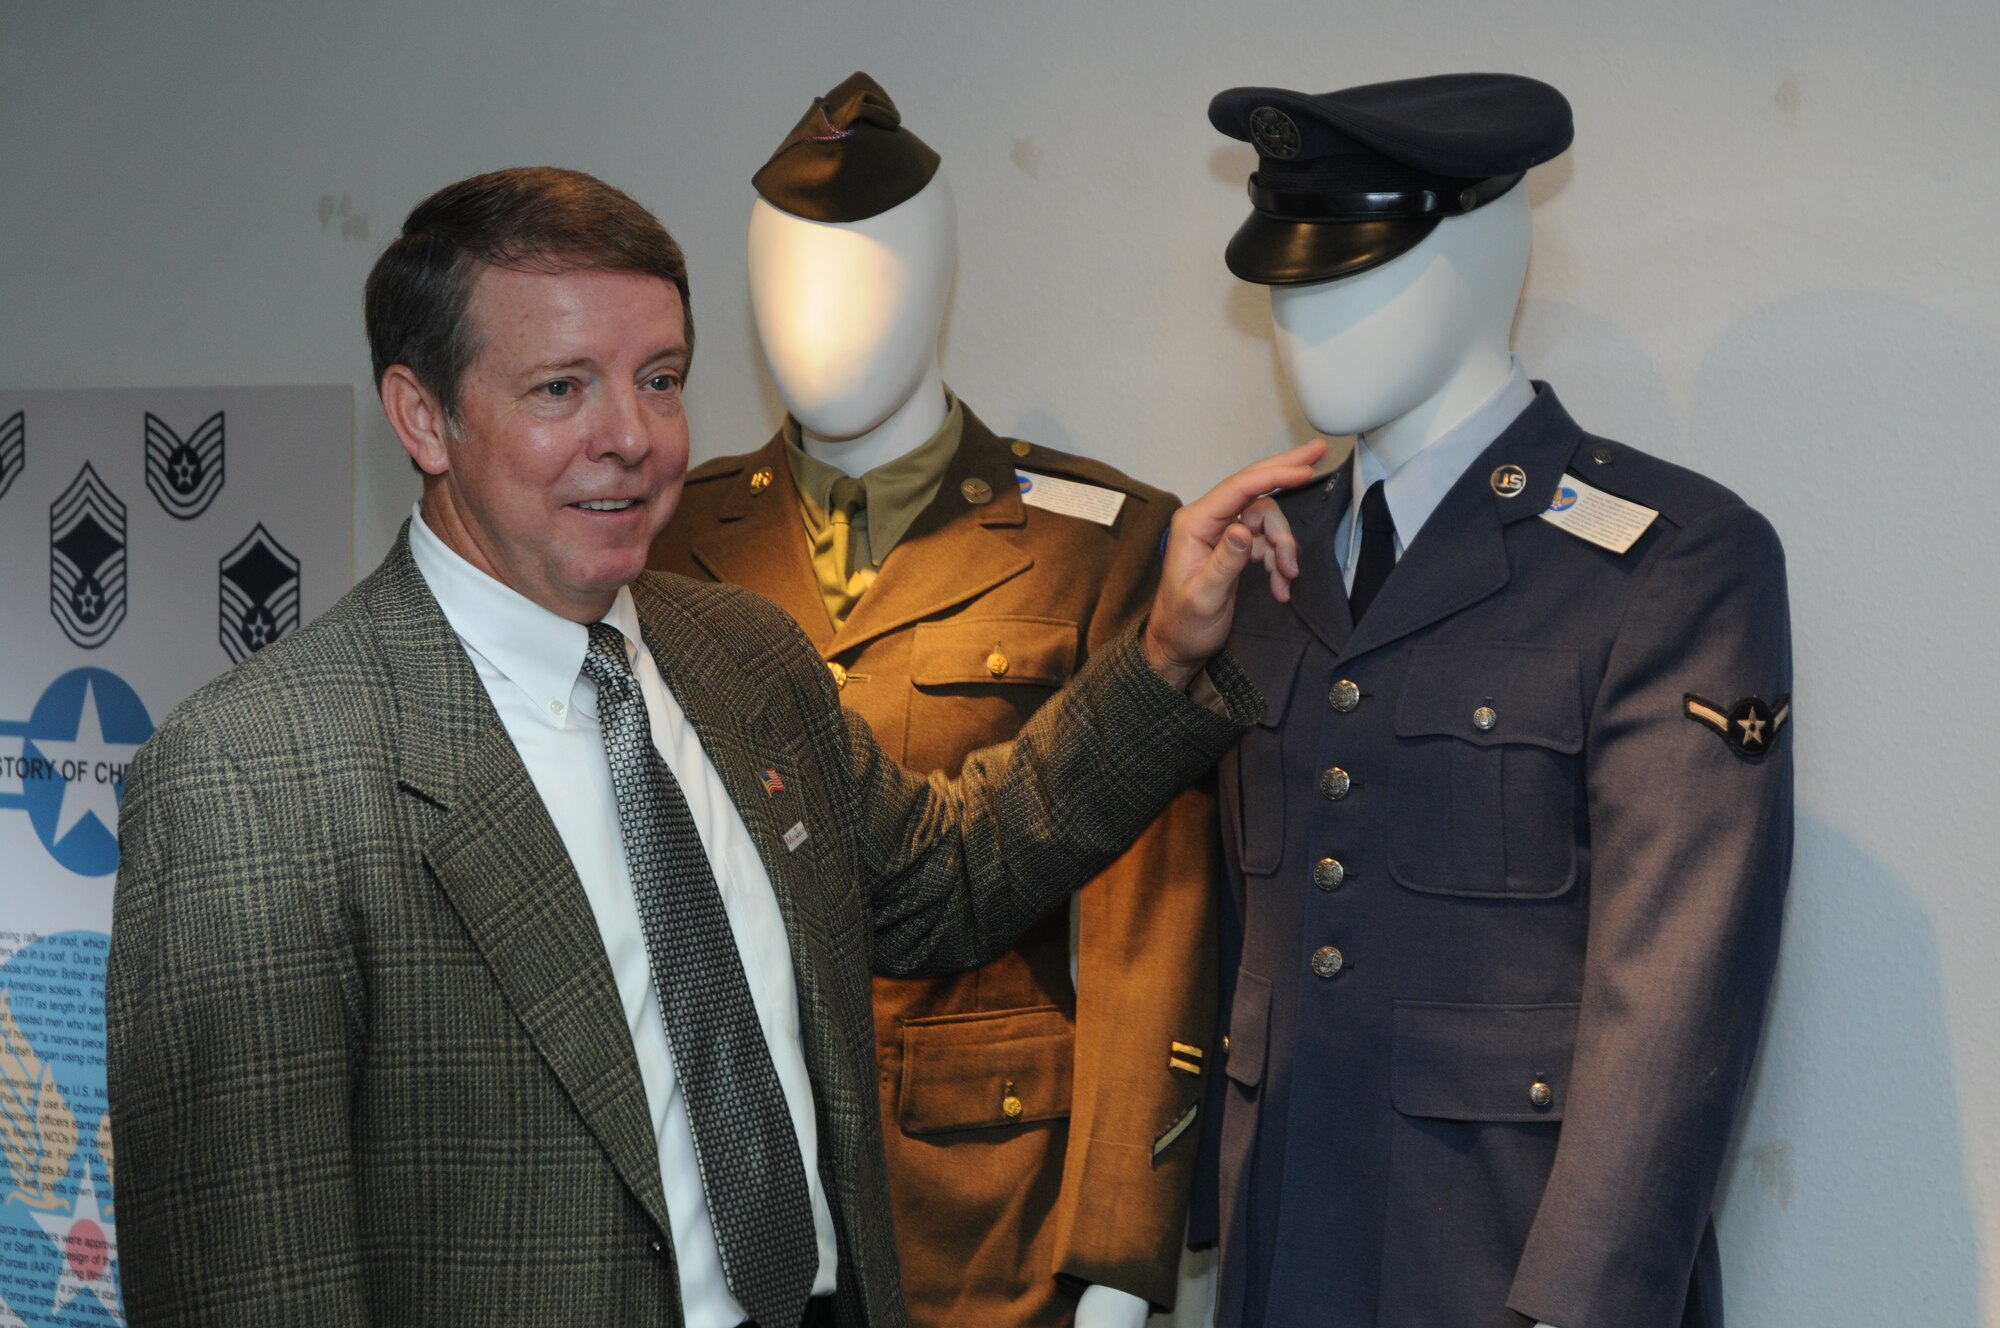 Fifteenth Chief Master Sgt. of the Air Force Rodney McKinley admires displays at U.S. Air Forces in Europe Enlisted Heritage Room during his visit to Ramstein Air Base, Germany, July 26, 2010.  (U.S. Air Force photo by Master Sgt. Gino Mattorano)